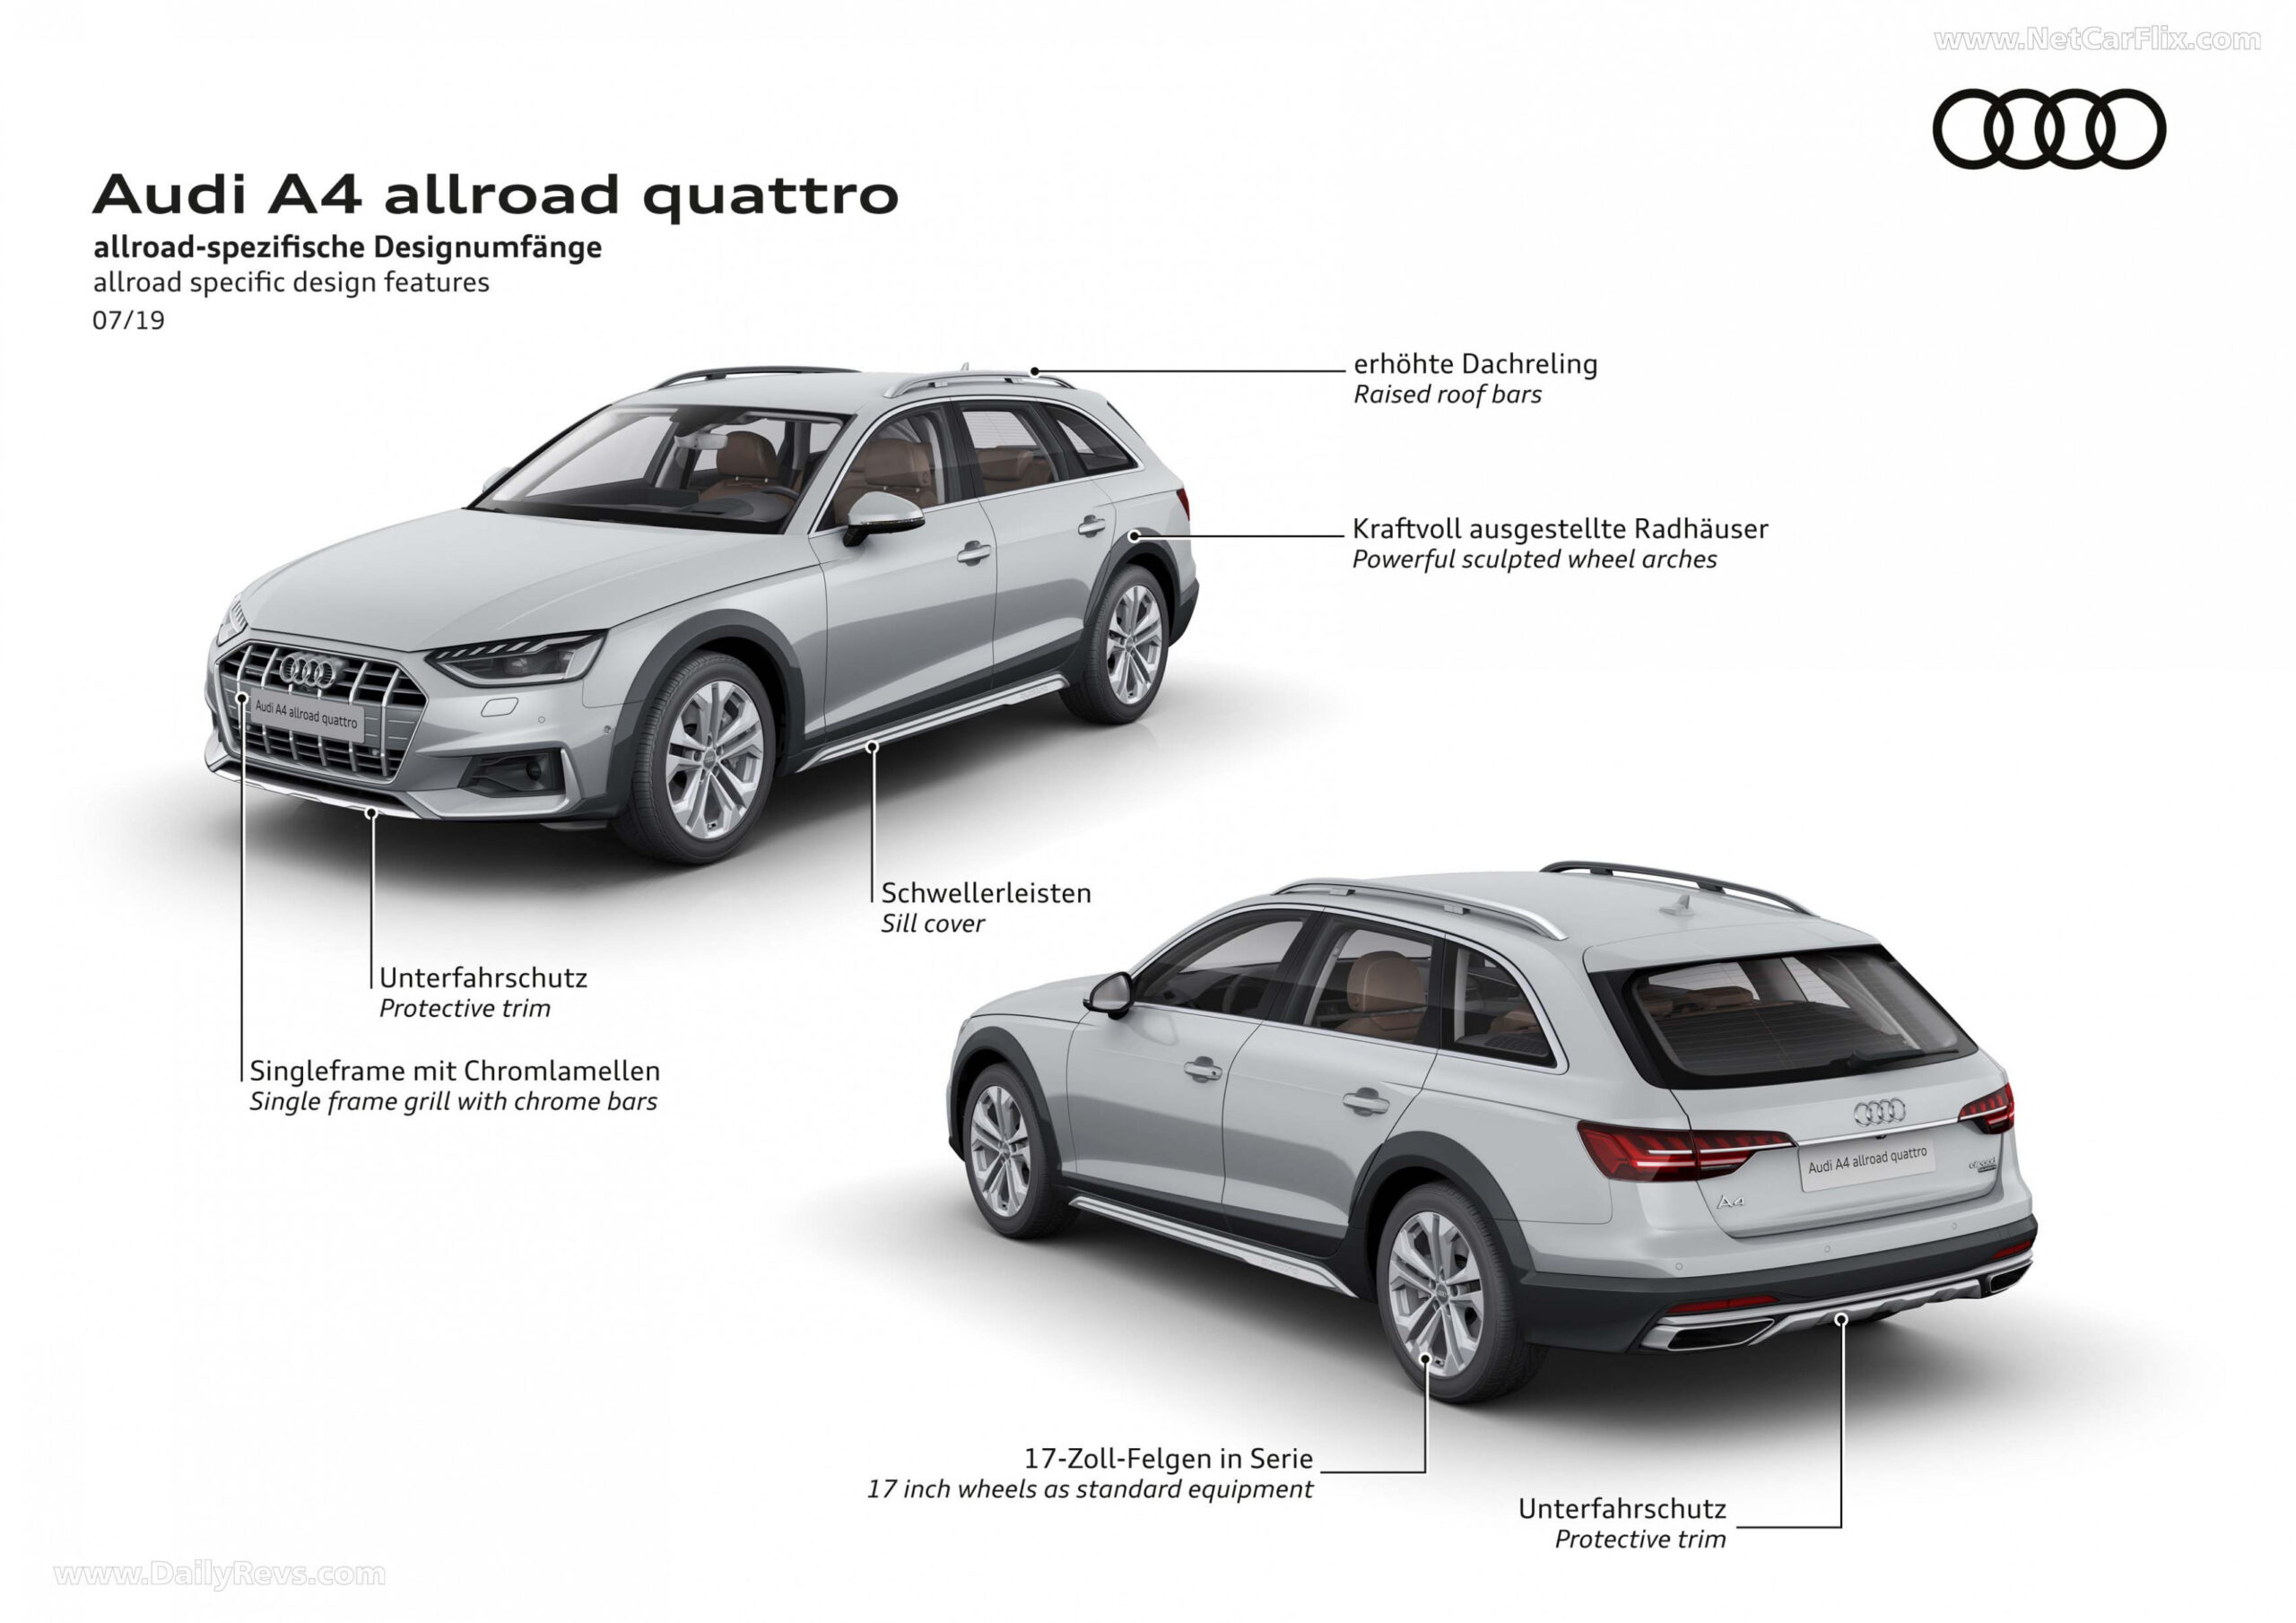 3 Audi A3 Allroad Quattro Hd Pictures, Videos, Specs Audi A4 Ground Clearance